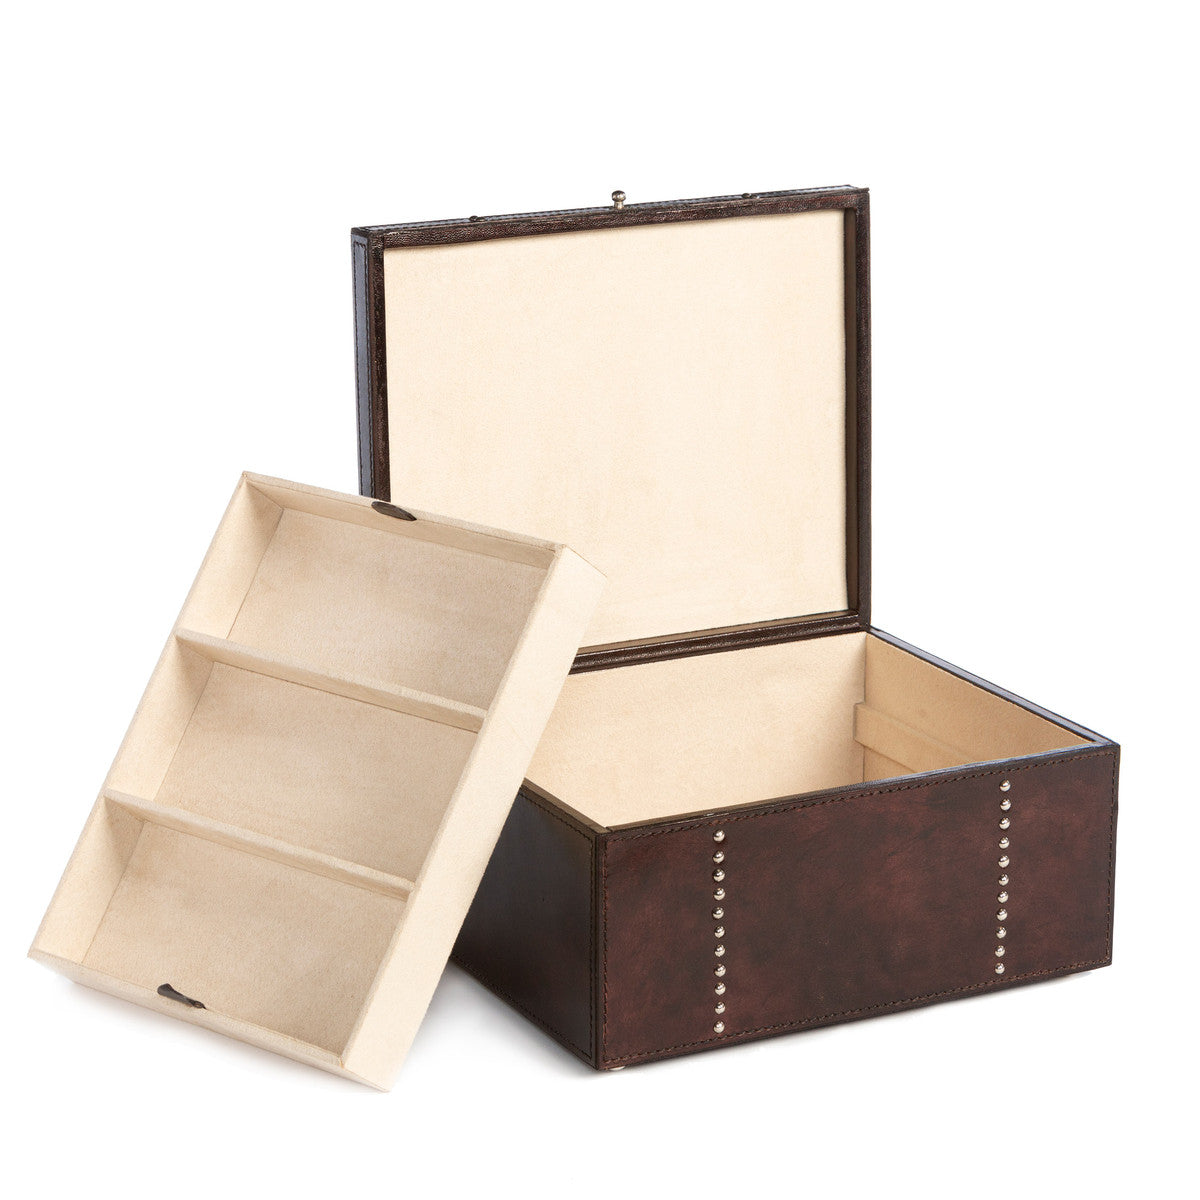 Park Hill Collection Tate Leather Classic Jewelry Box